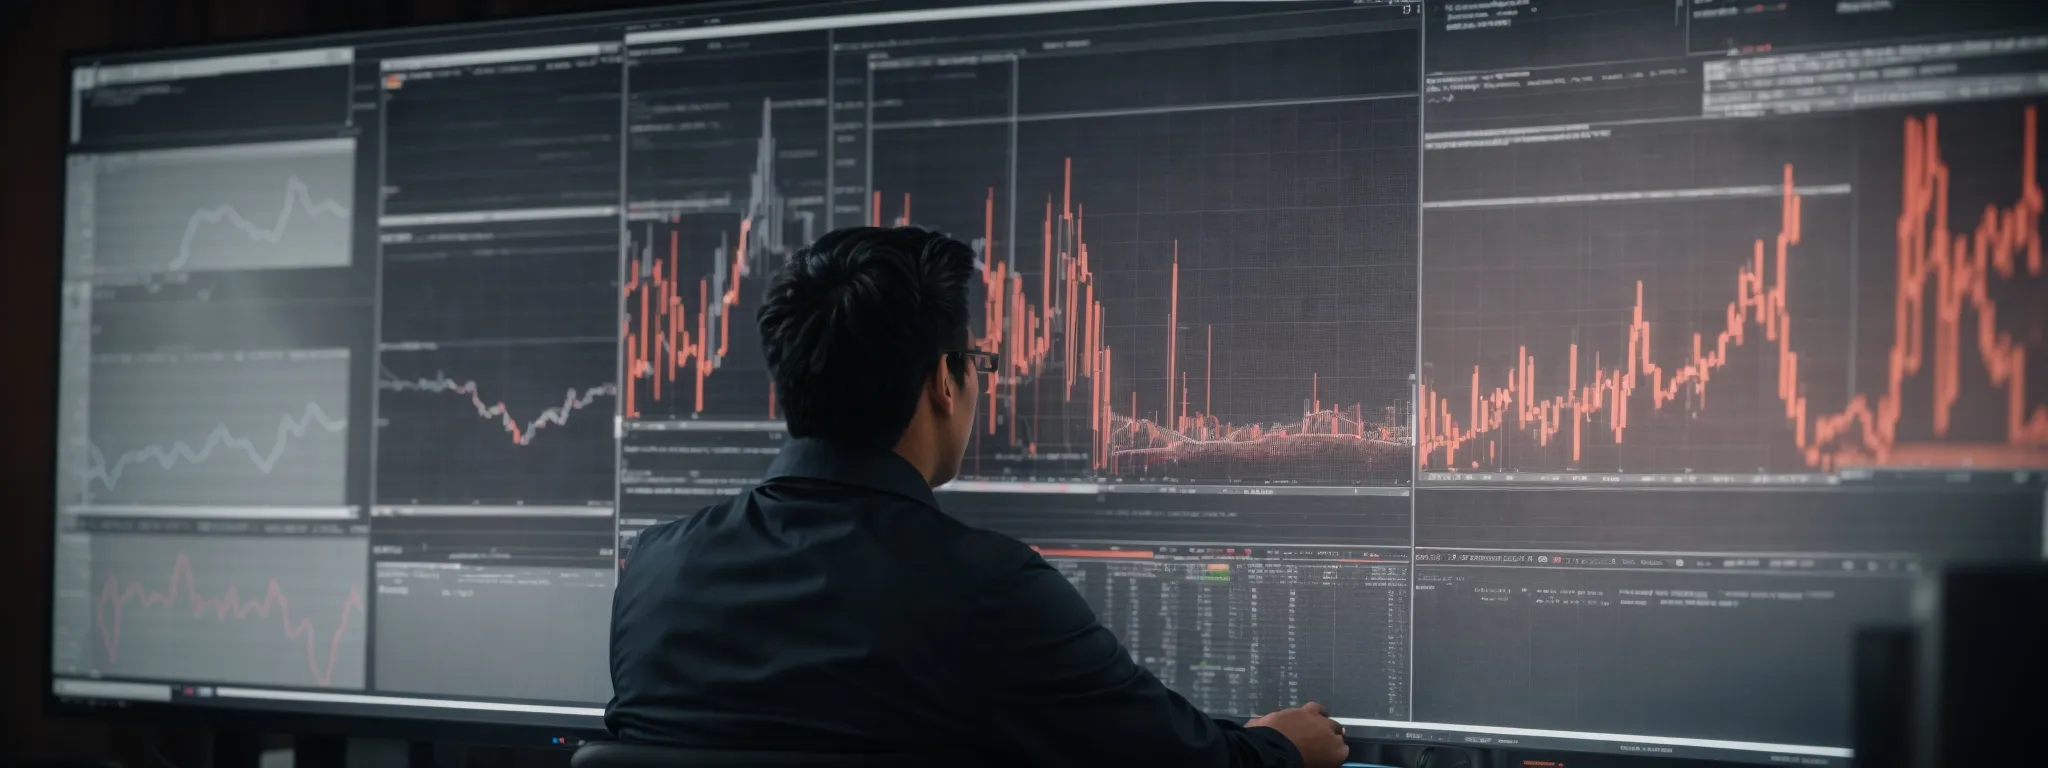 a person analyzes complex graphs and charts on a large monitor, reflecting advanced seo analytics.